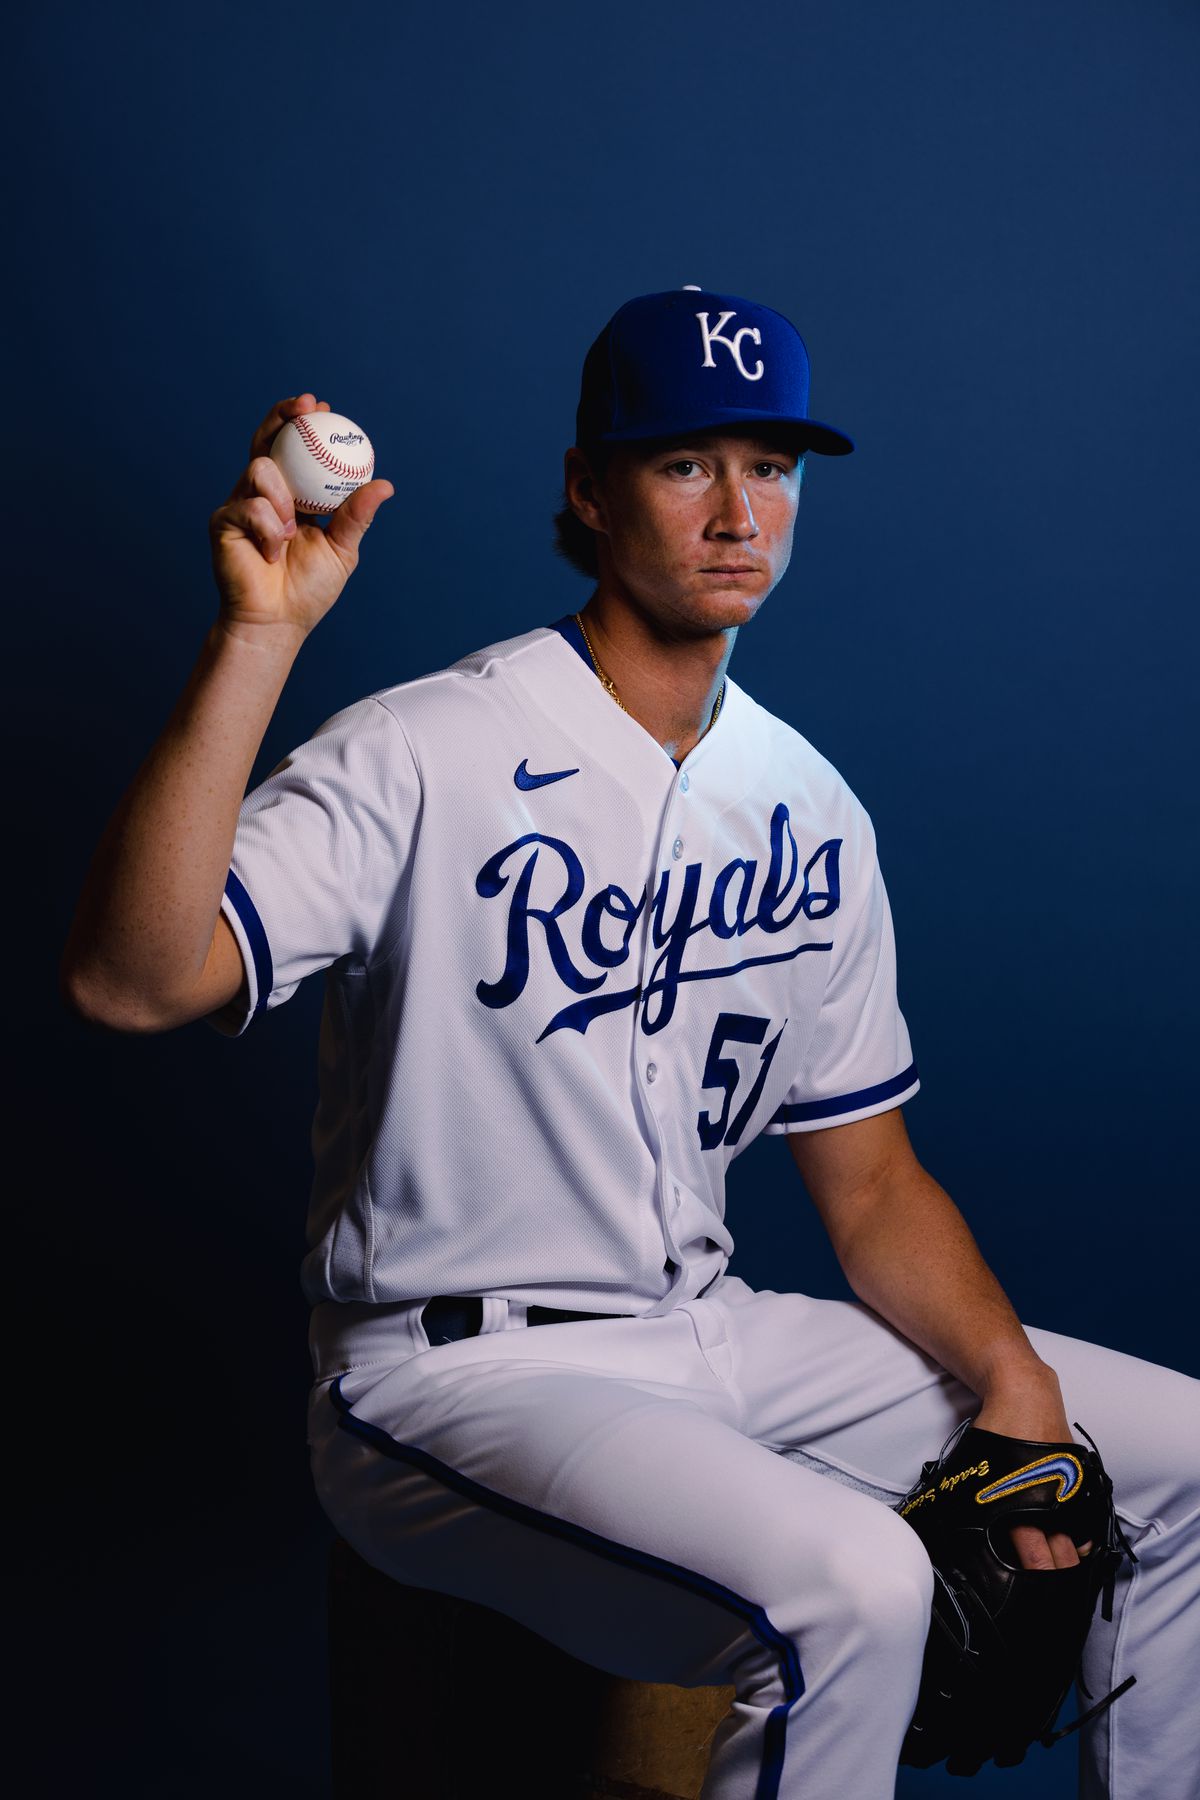 Brady Singer #51 of the Kansas City Royals poses for a photo on media day at Surprise Stadium on February 22, 2023 in Surprise, Arizona.